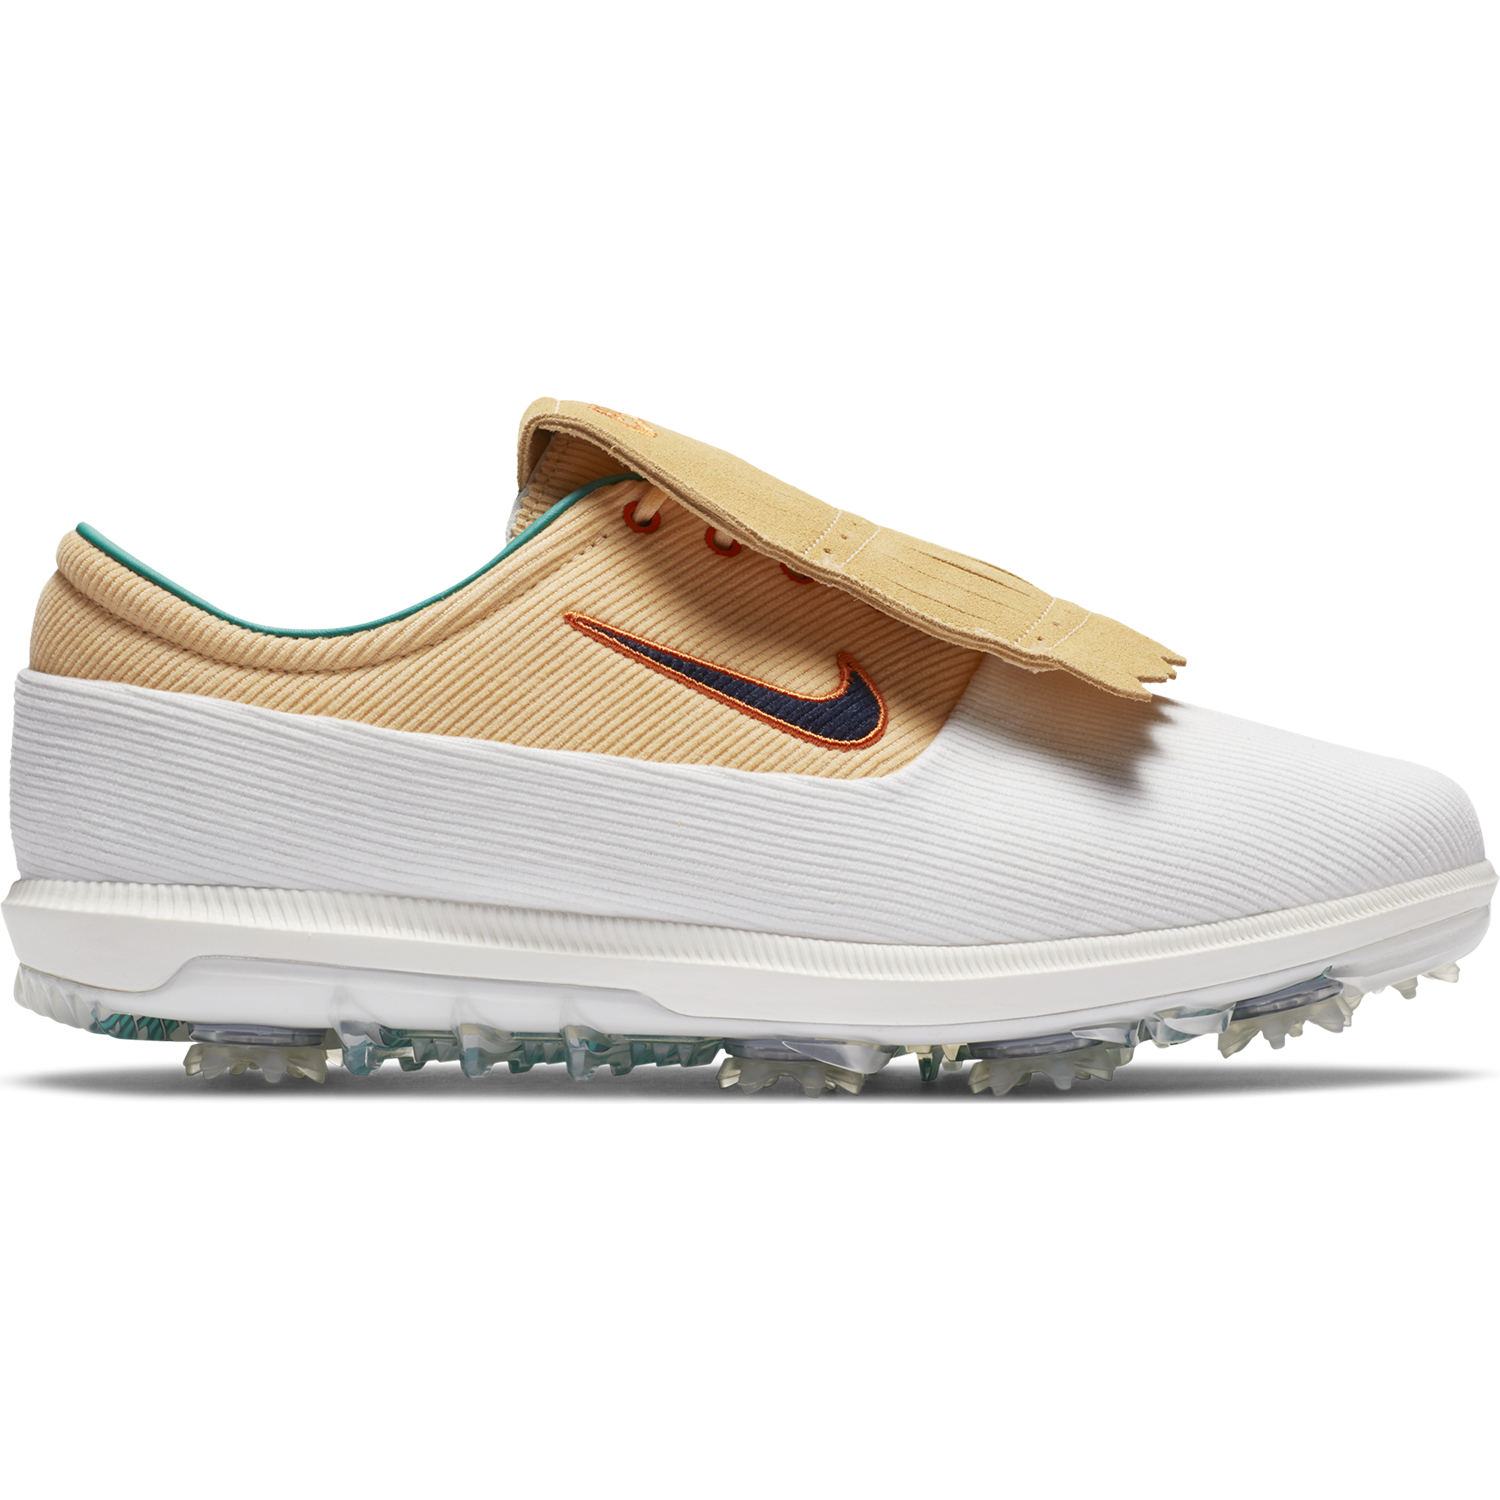 air zoom victory tour golf shoes